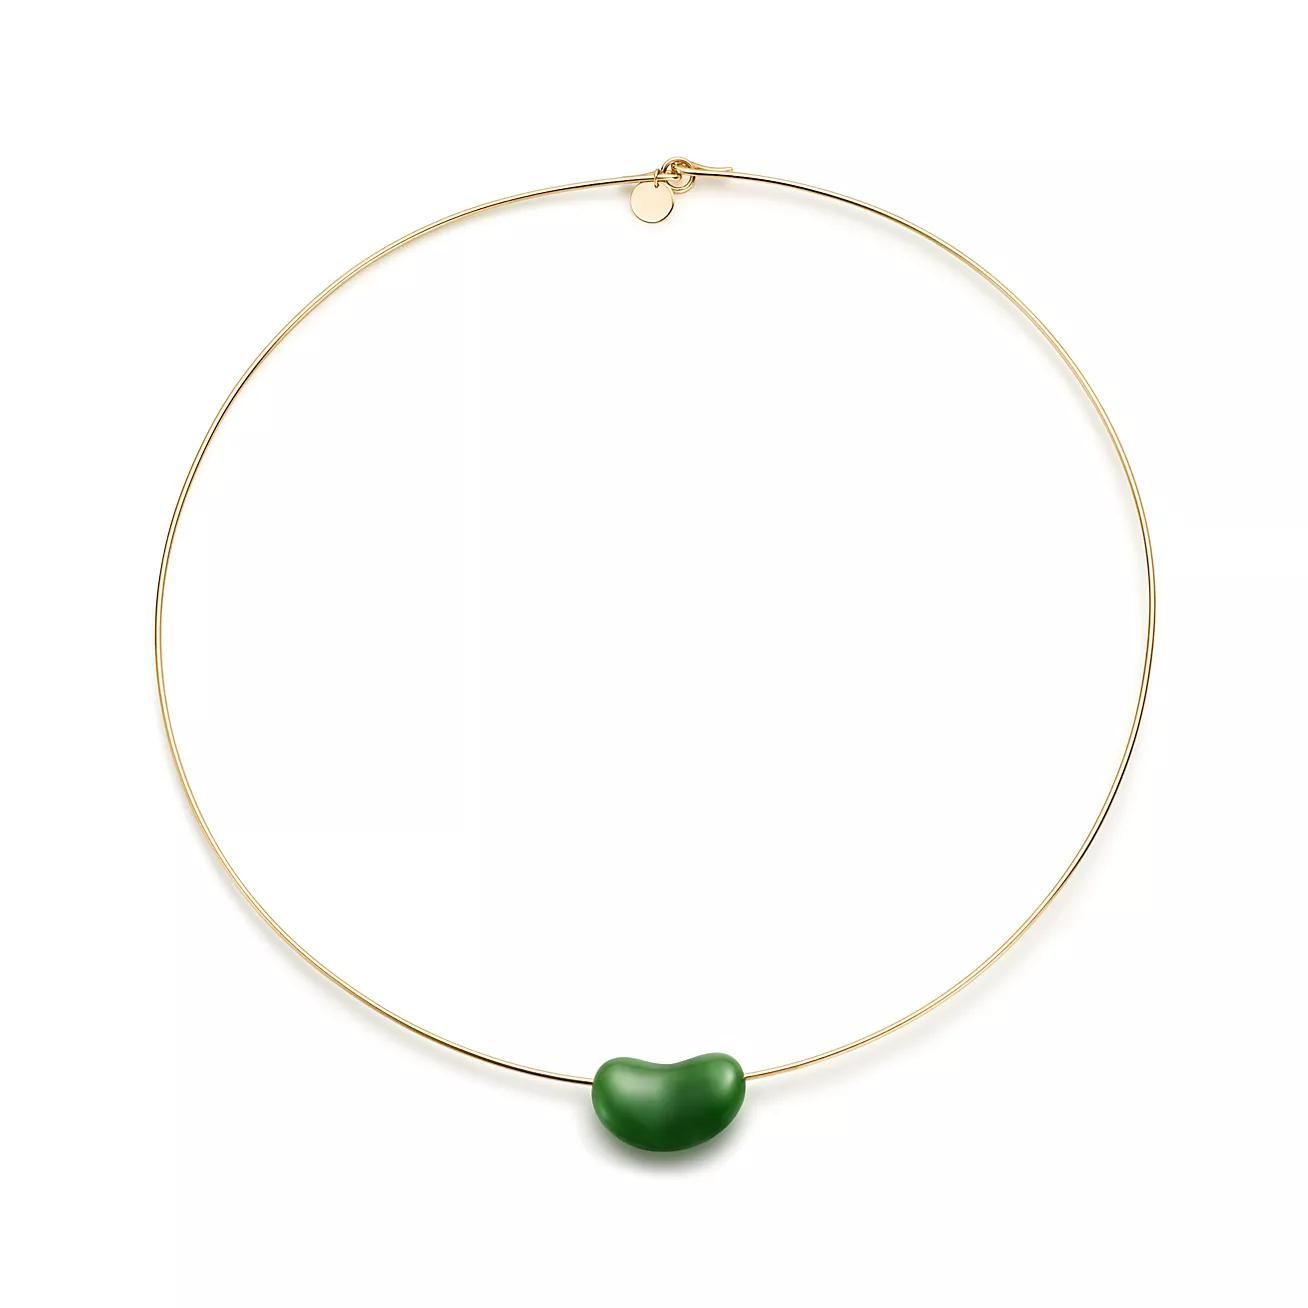 A fine jewelry classic reimagined as a jade-embellished choker felt especially right for 2022.